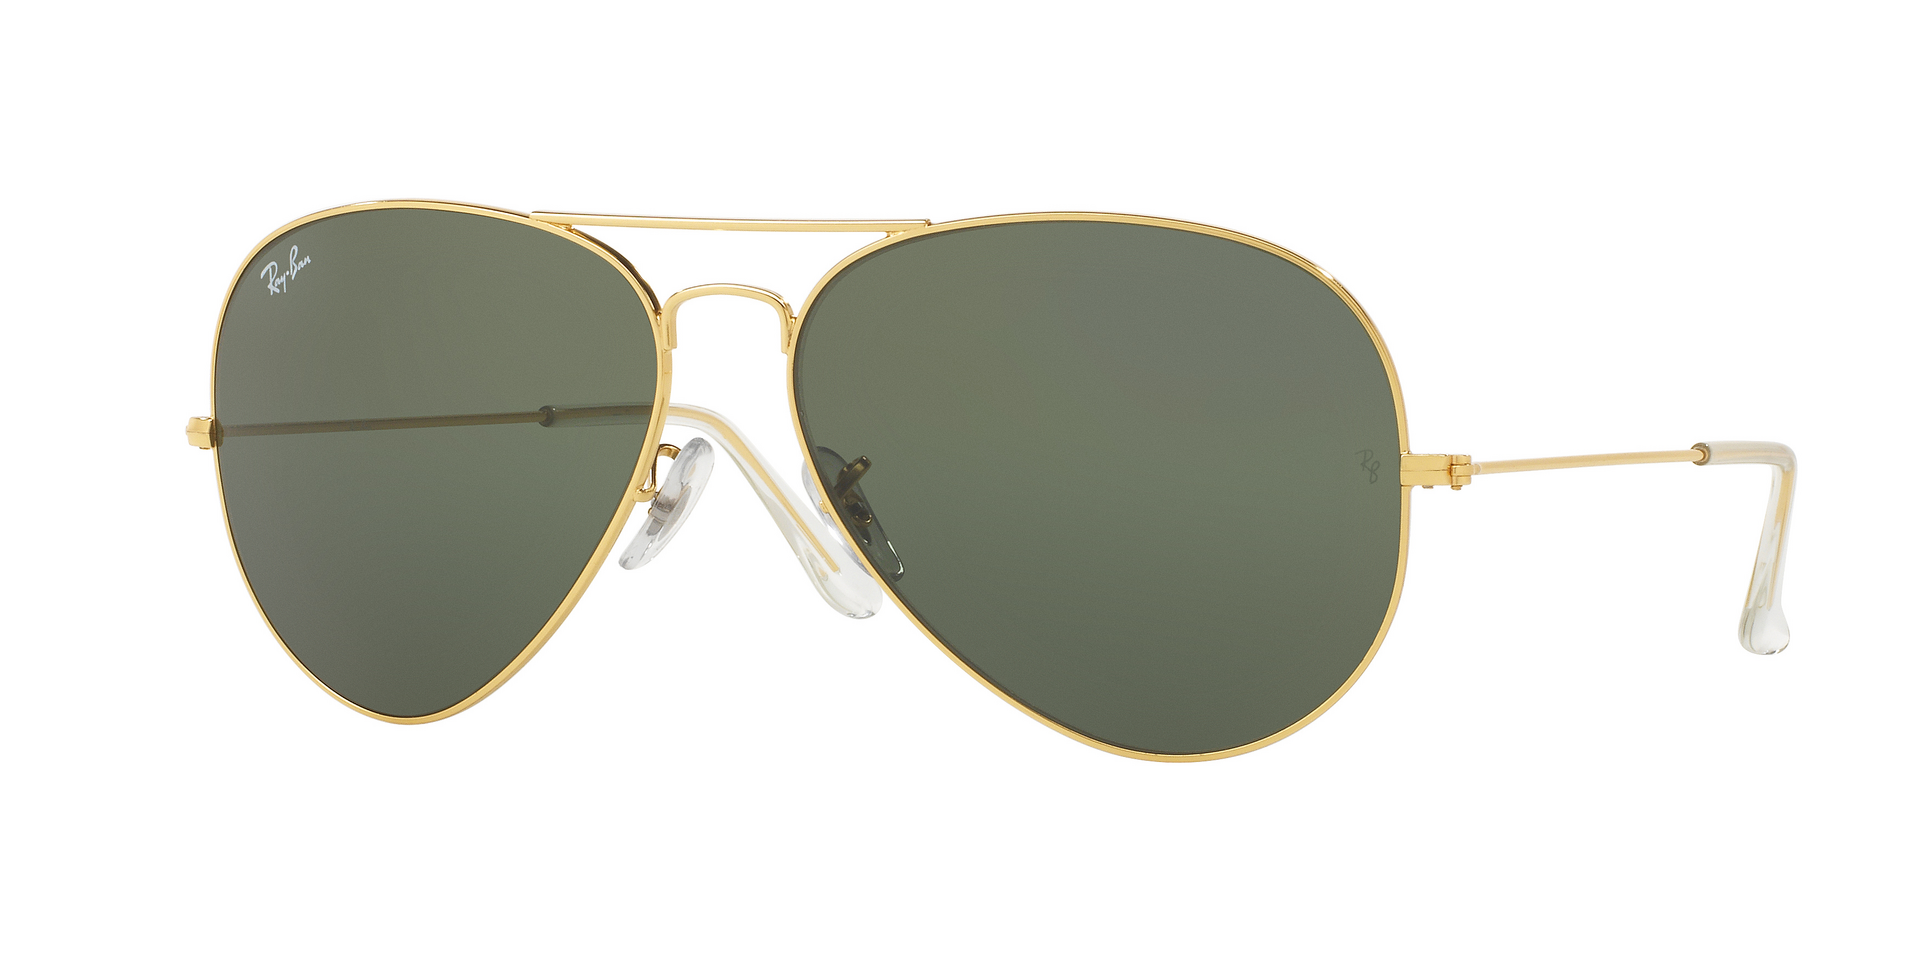 Buy Ray-Ban 0Rb3026Iw Sunglasses Online.